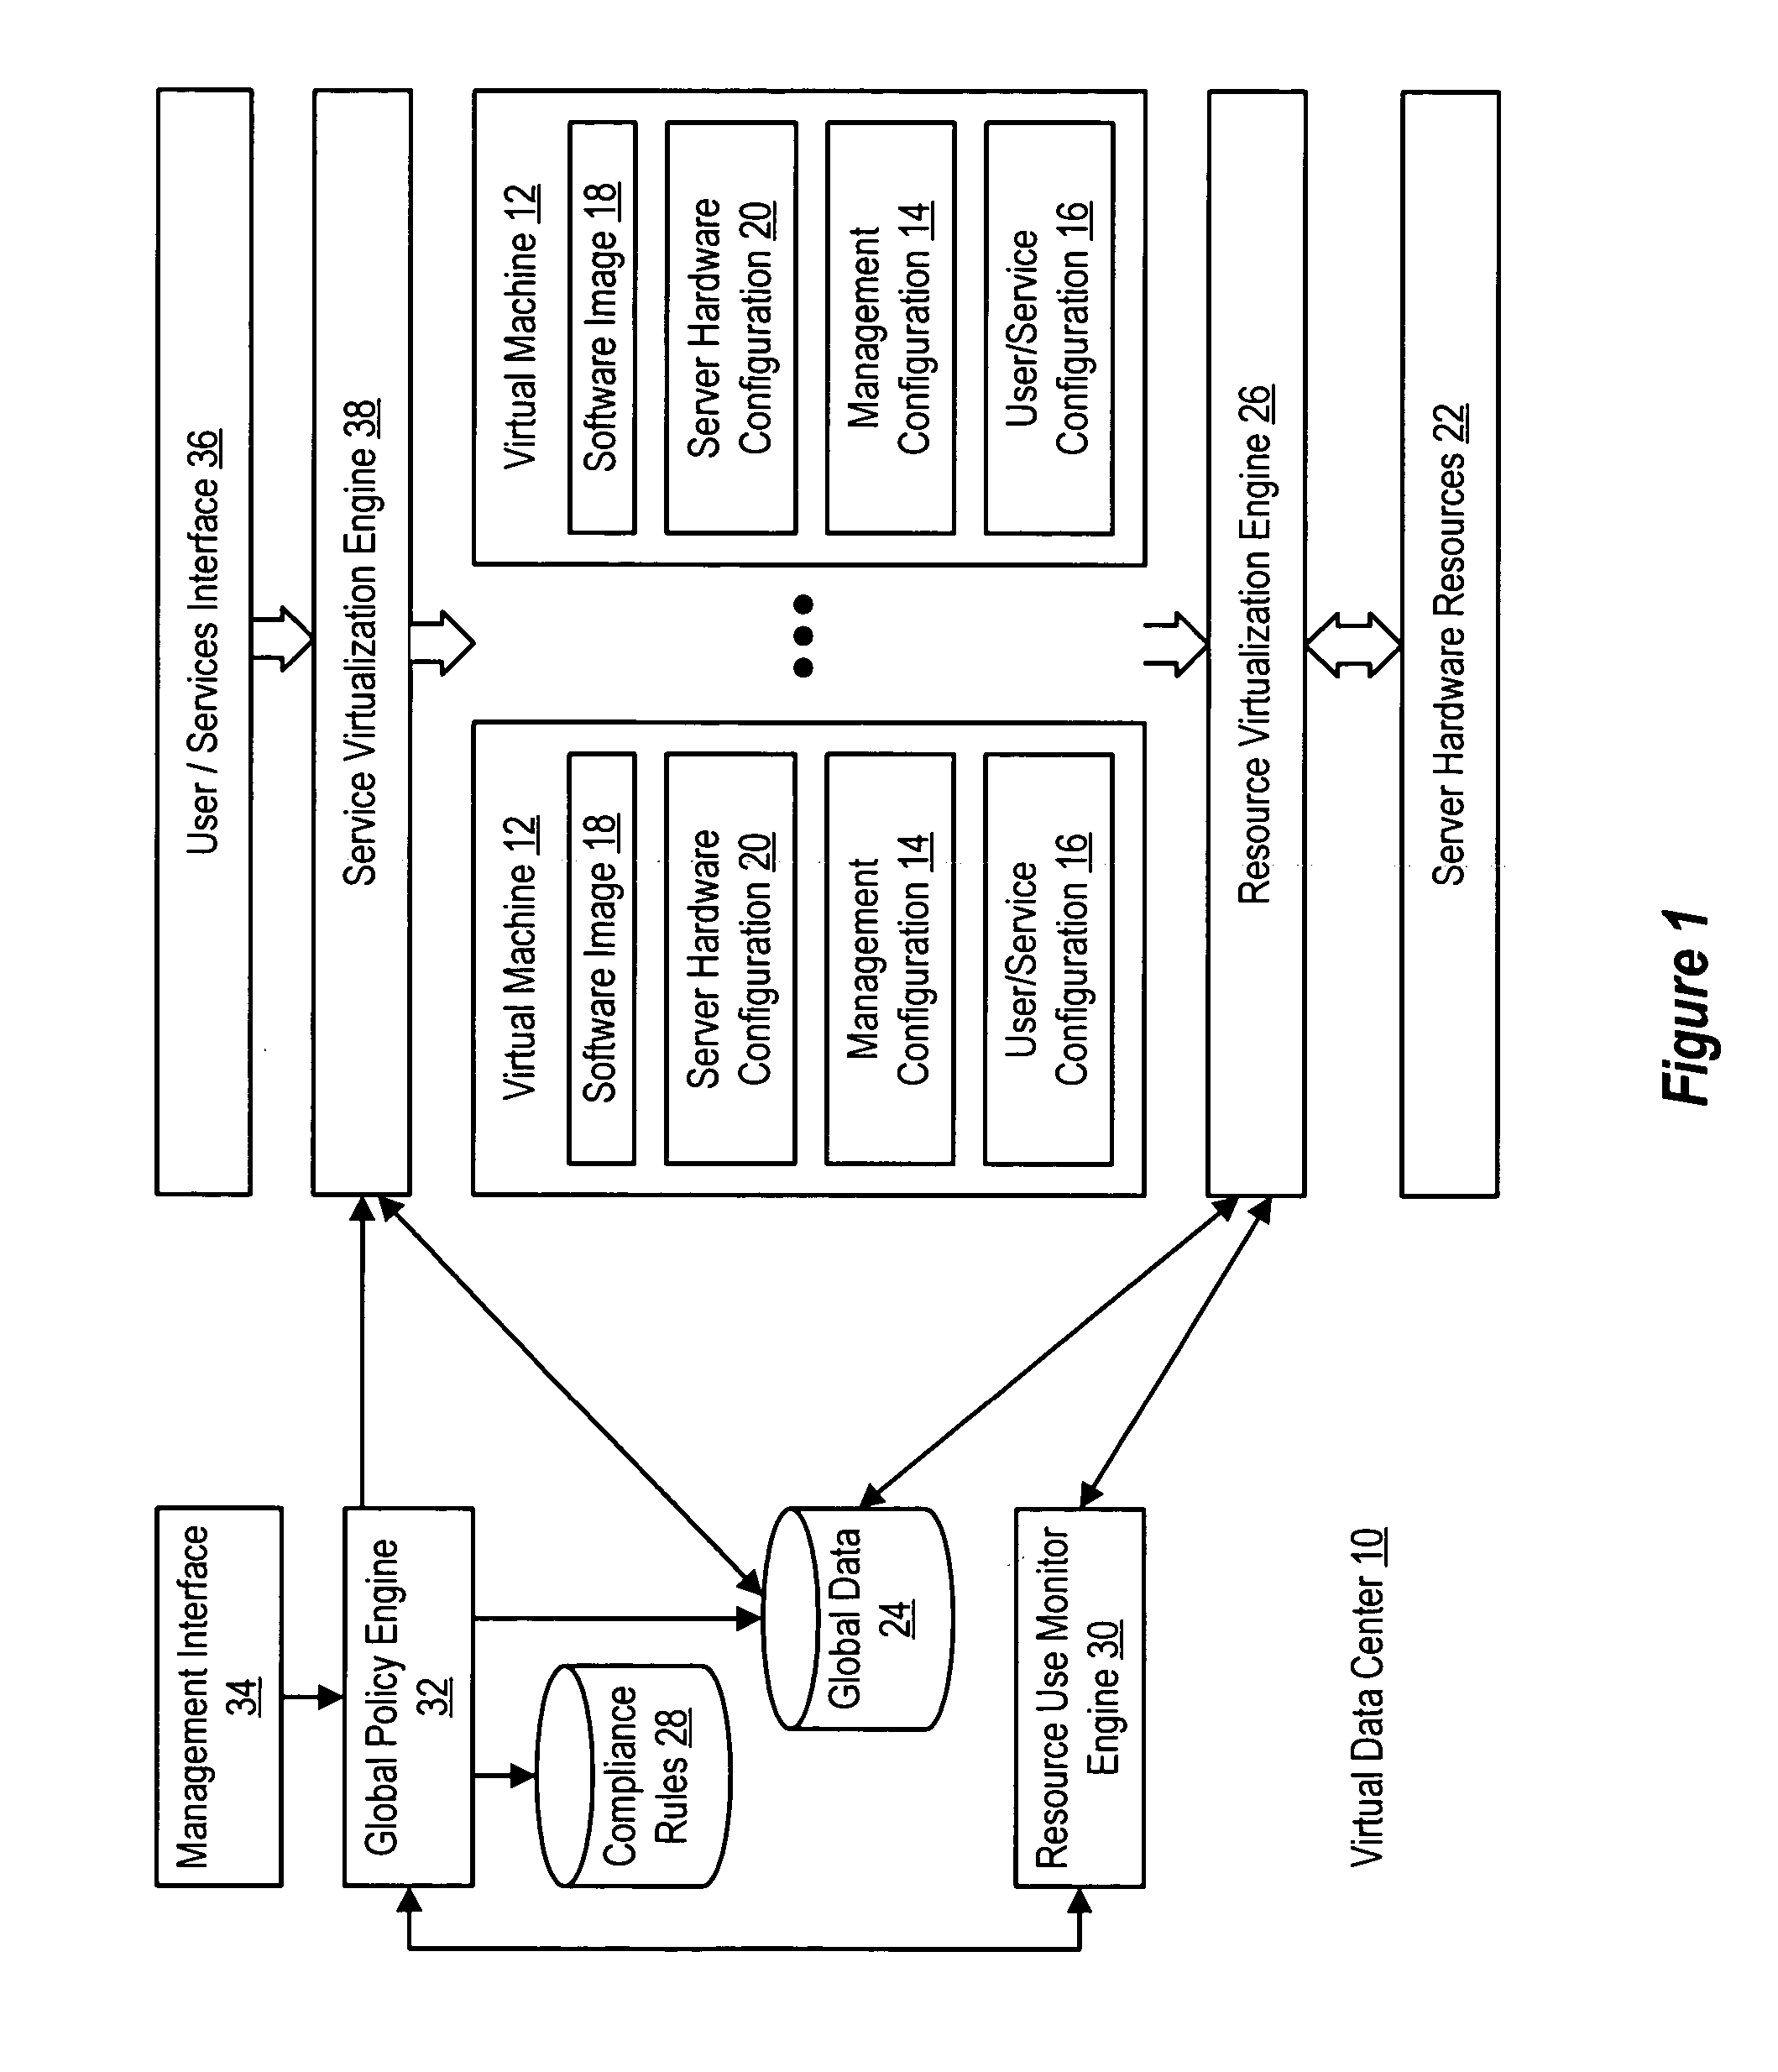 System and method using virtual machines for decoupling software from users and services